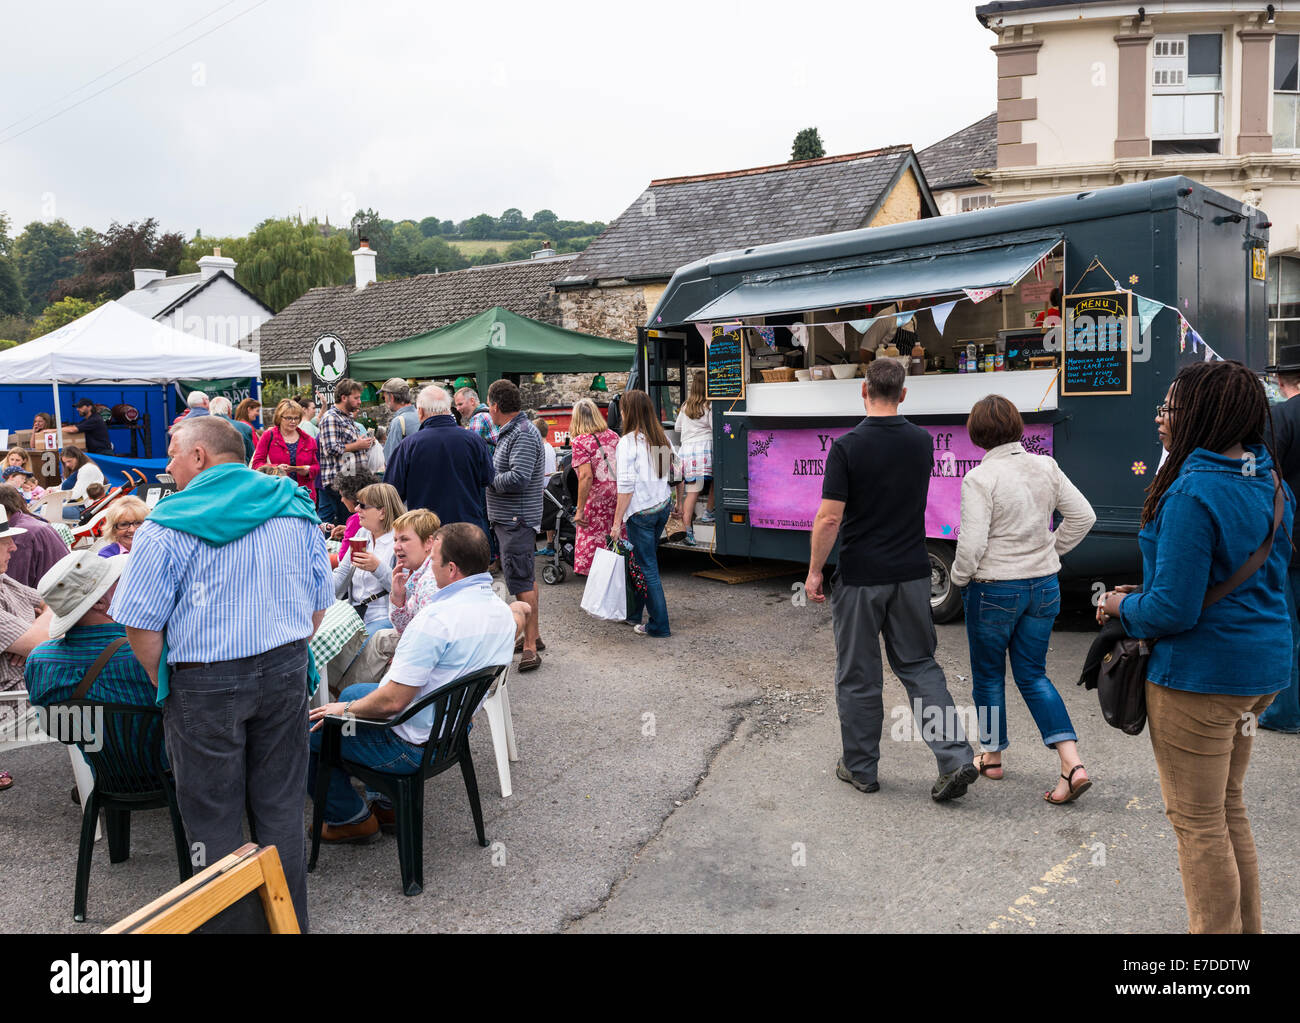 Ashburton Food & Drink Festival. Crowds of people gather for a social day at the Festival and an eating area. Stock Photo